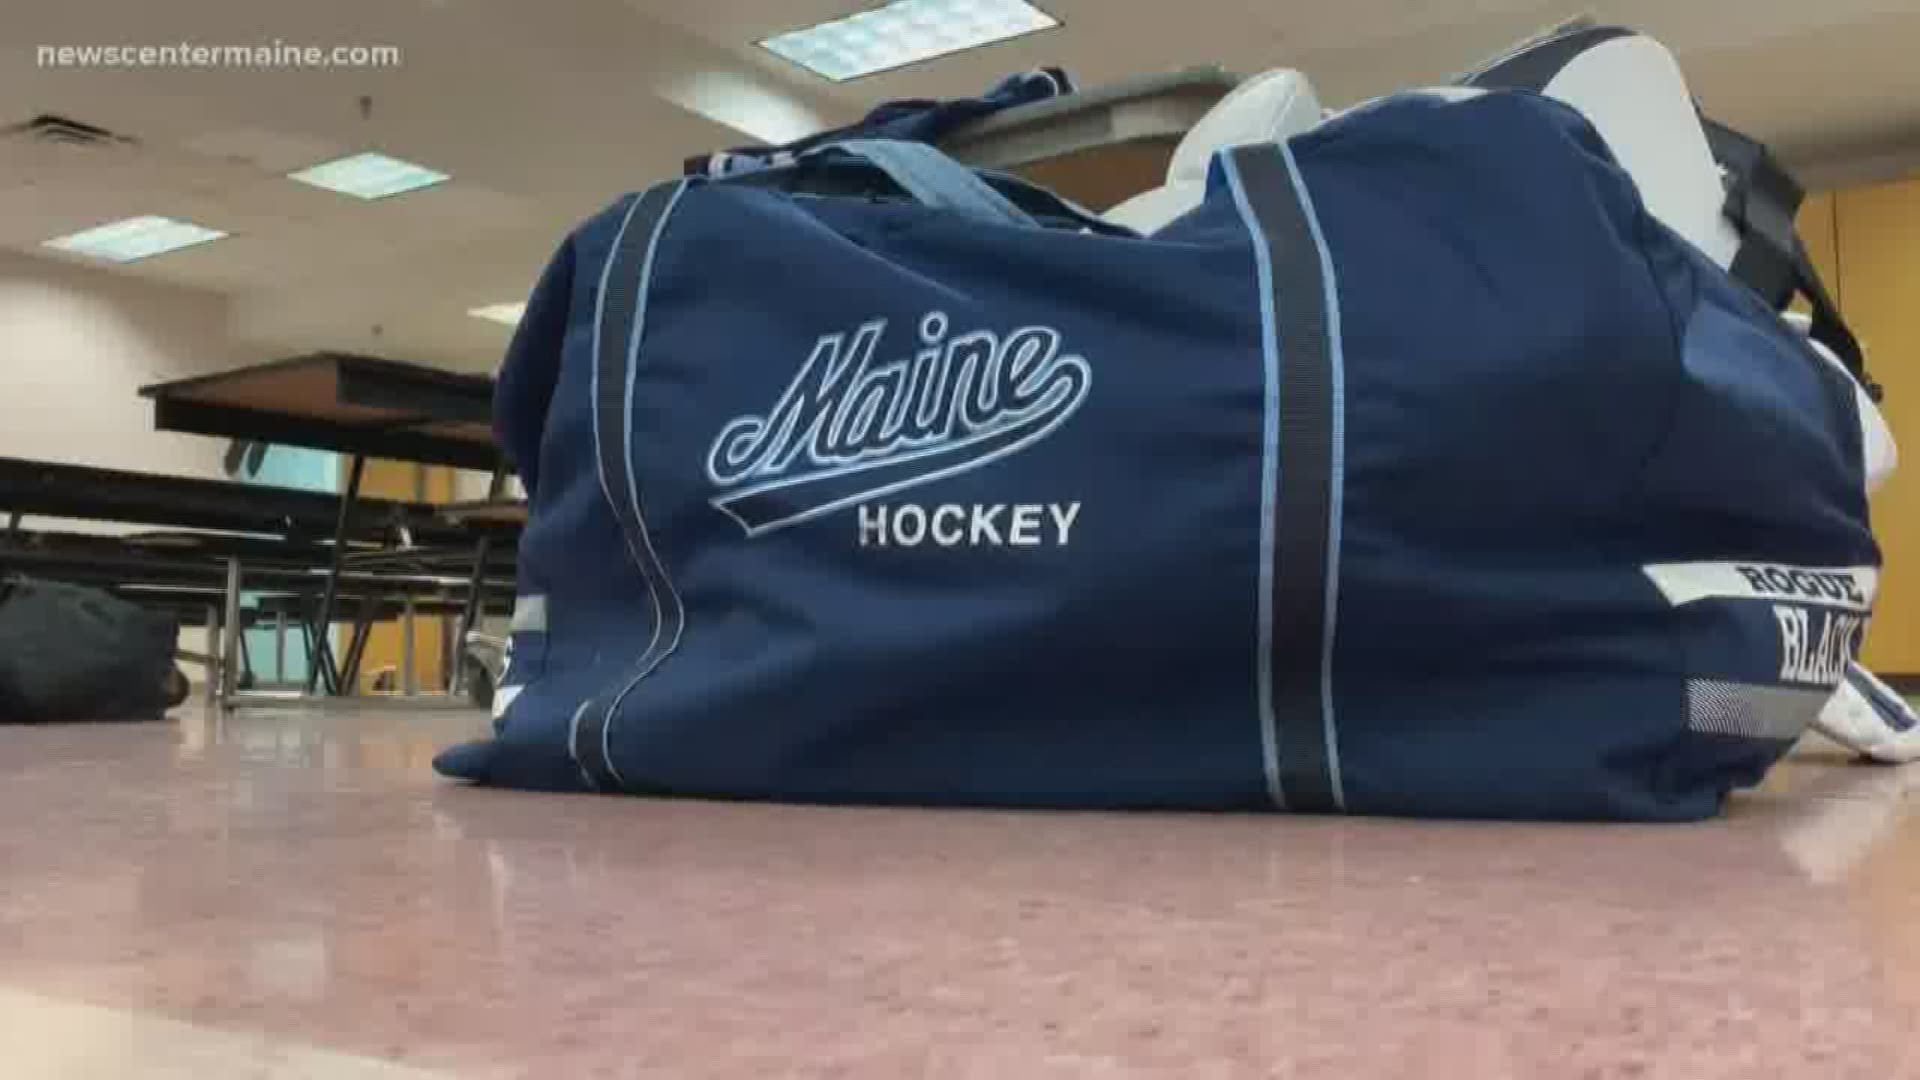 Wednesday morning preschoolers had all eyes on players from the UMaine Womens ice hockey team.